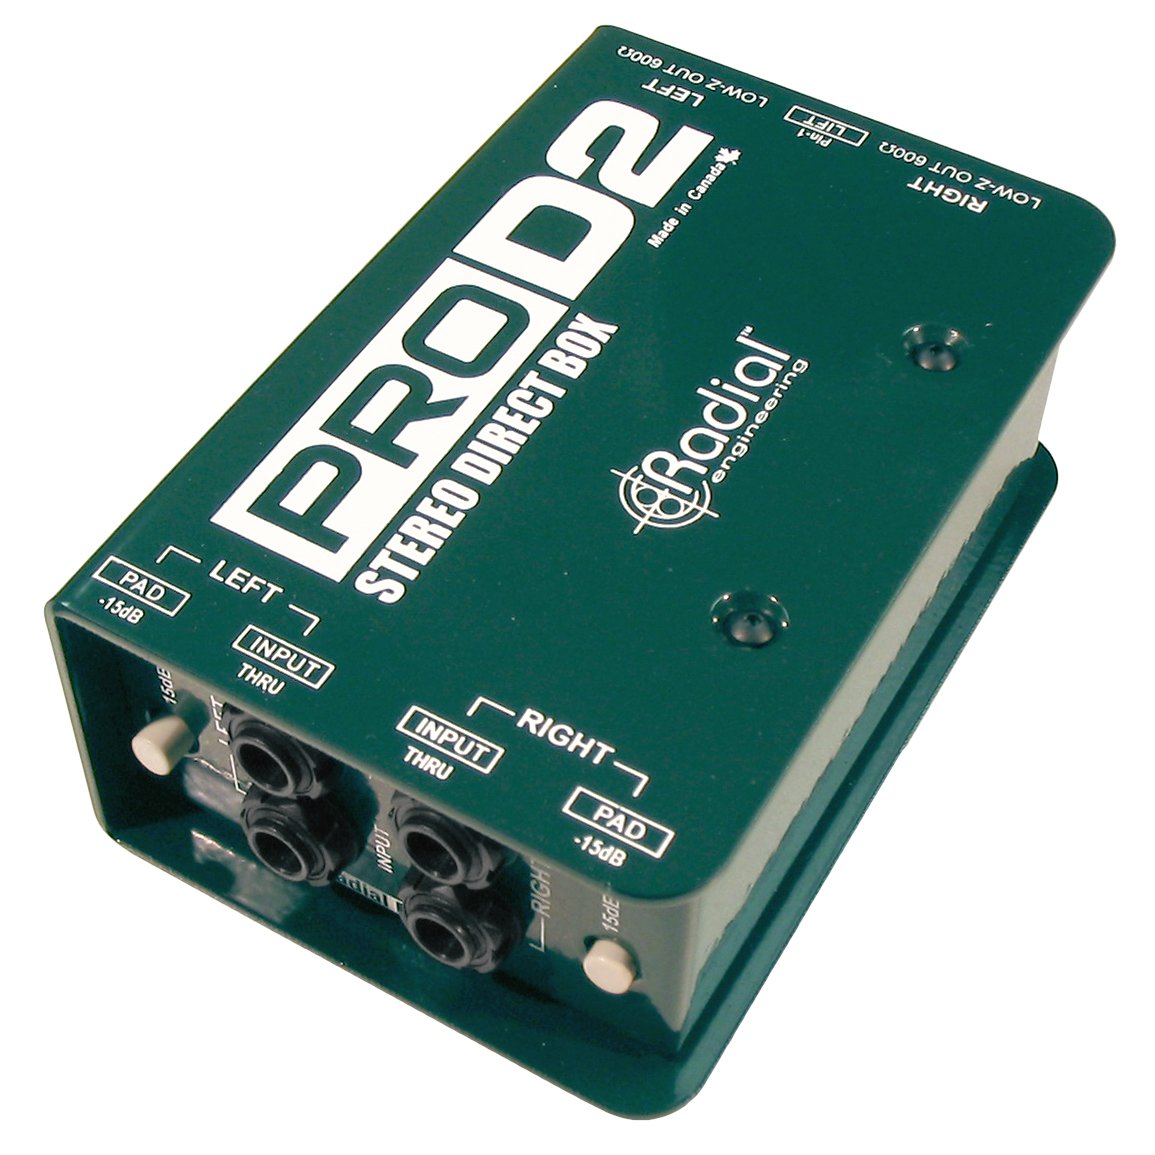 Radial Pro D2 Passive Stereo Direct Box